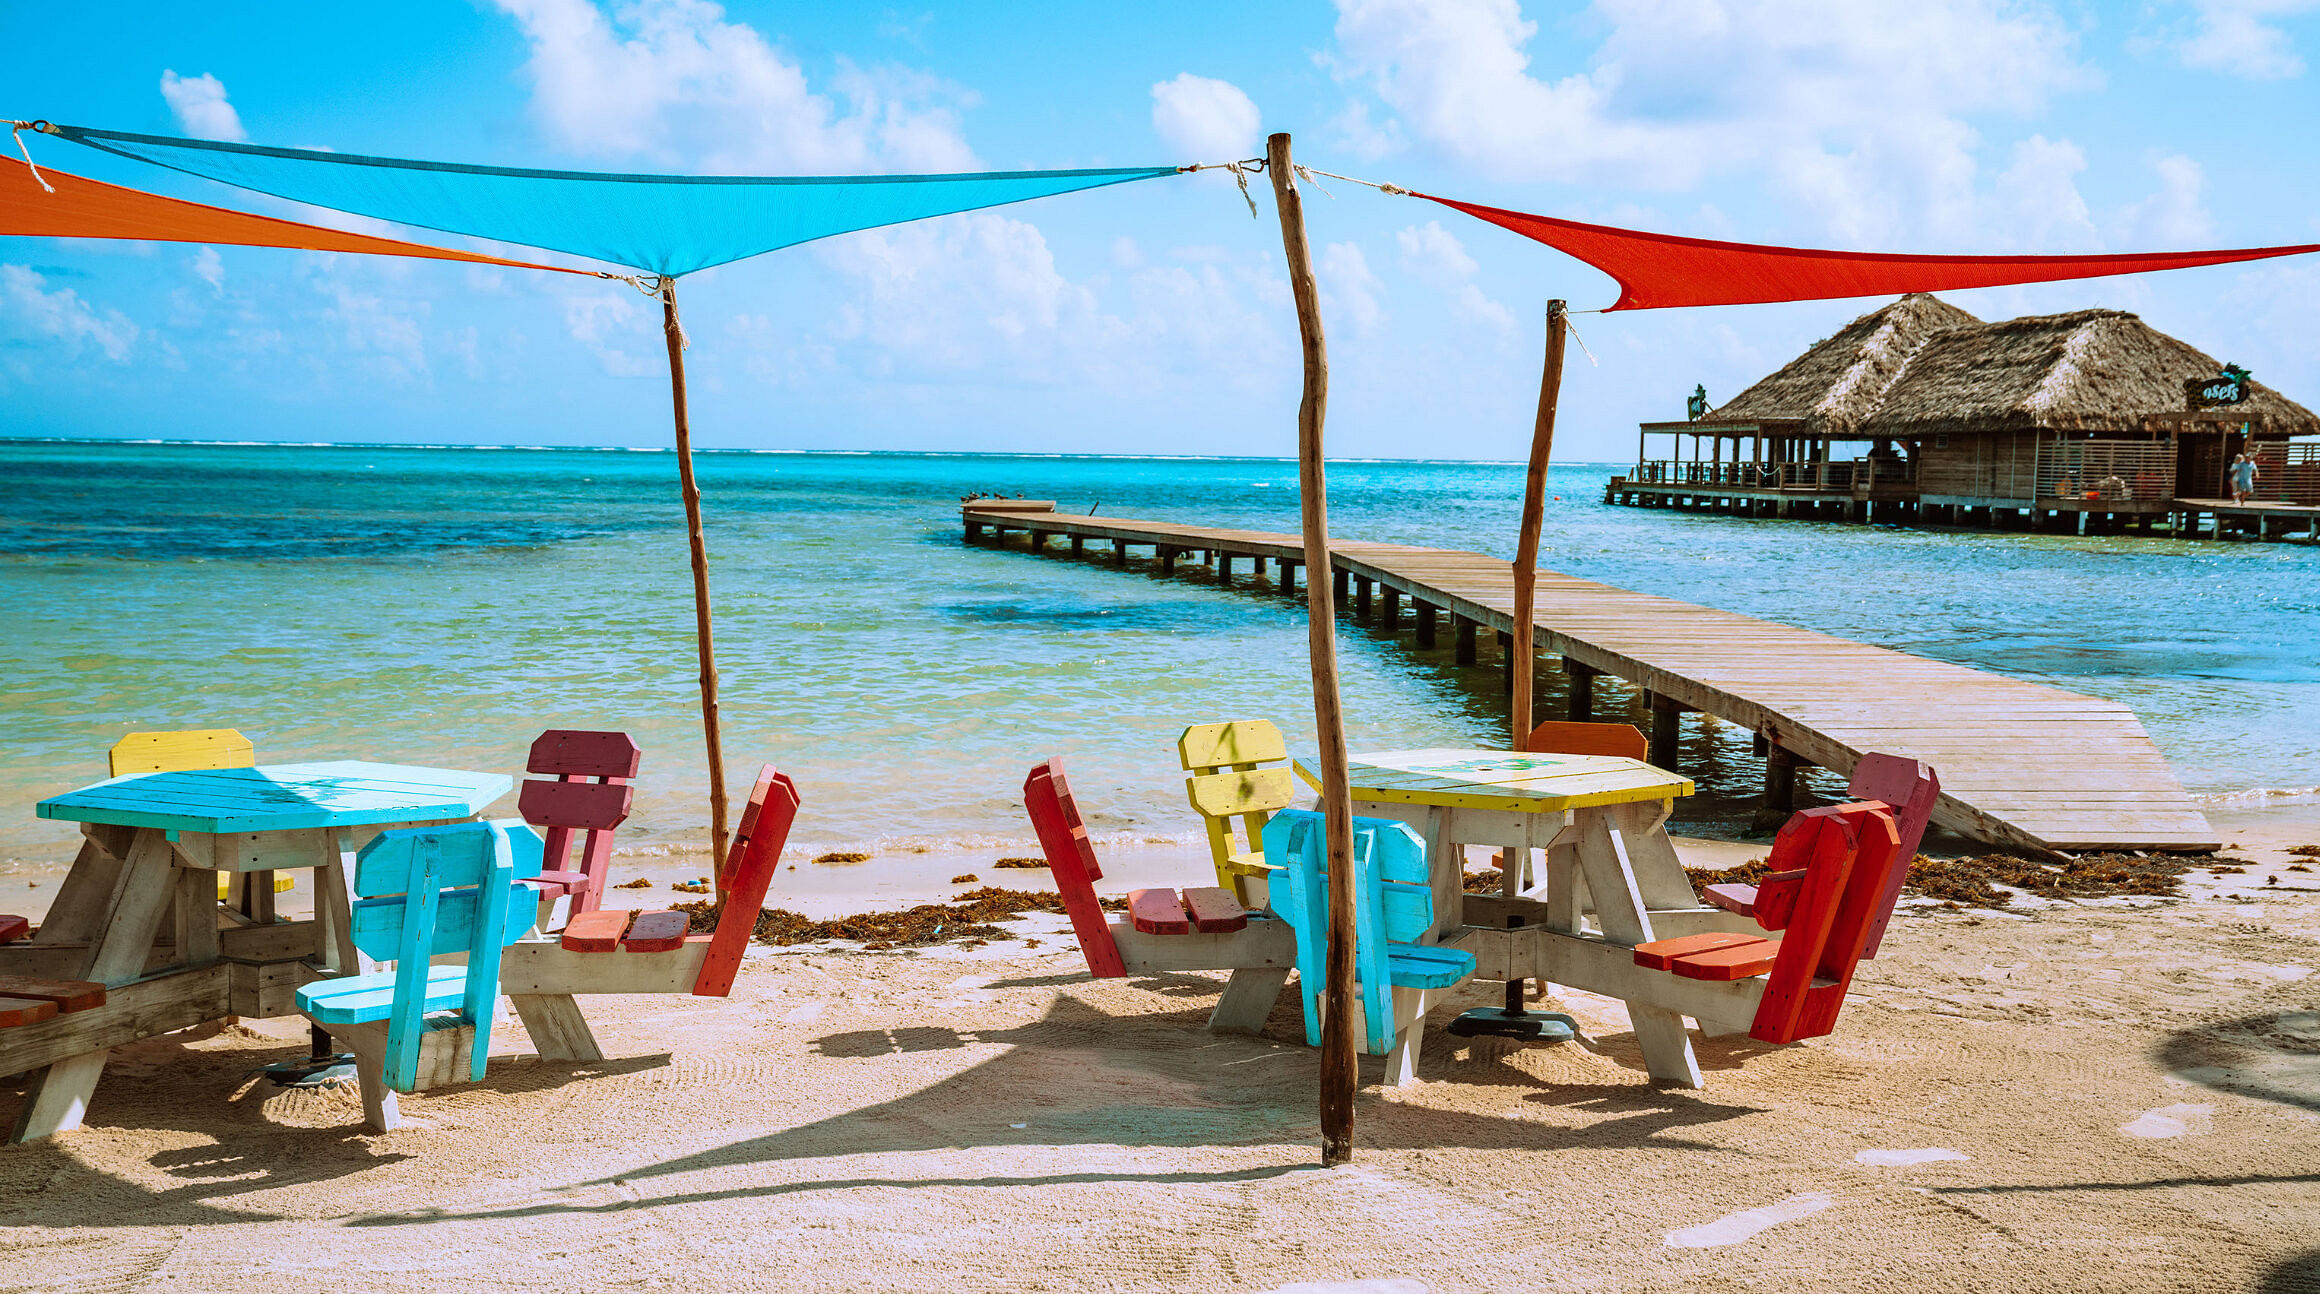 Colorful chairs and umbrellas on a beach in Ambergris Caye, Belize